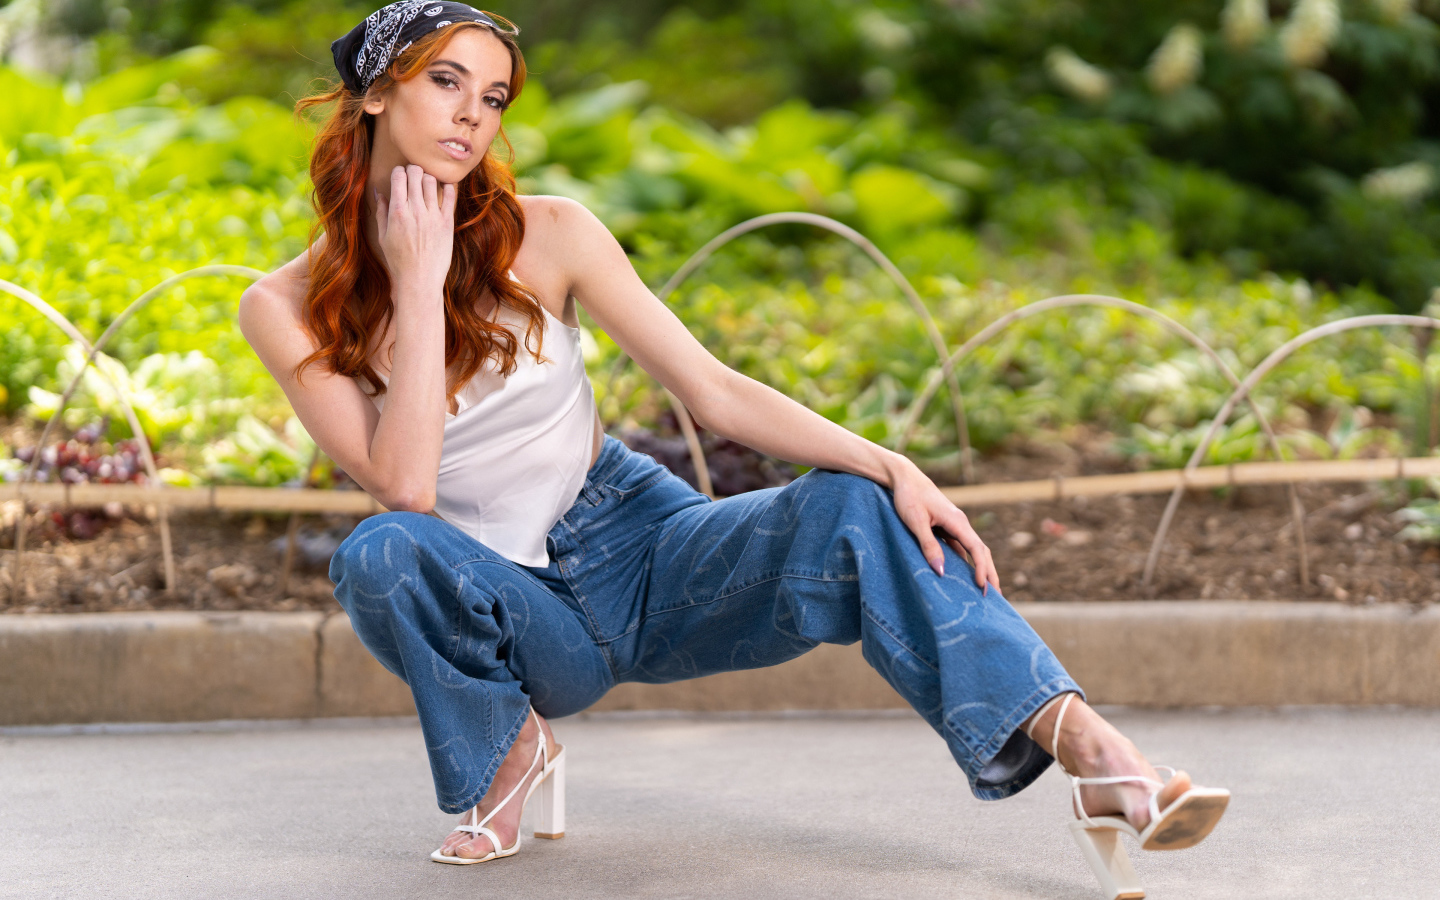 Red-haired girl in blue jeans